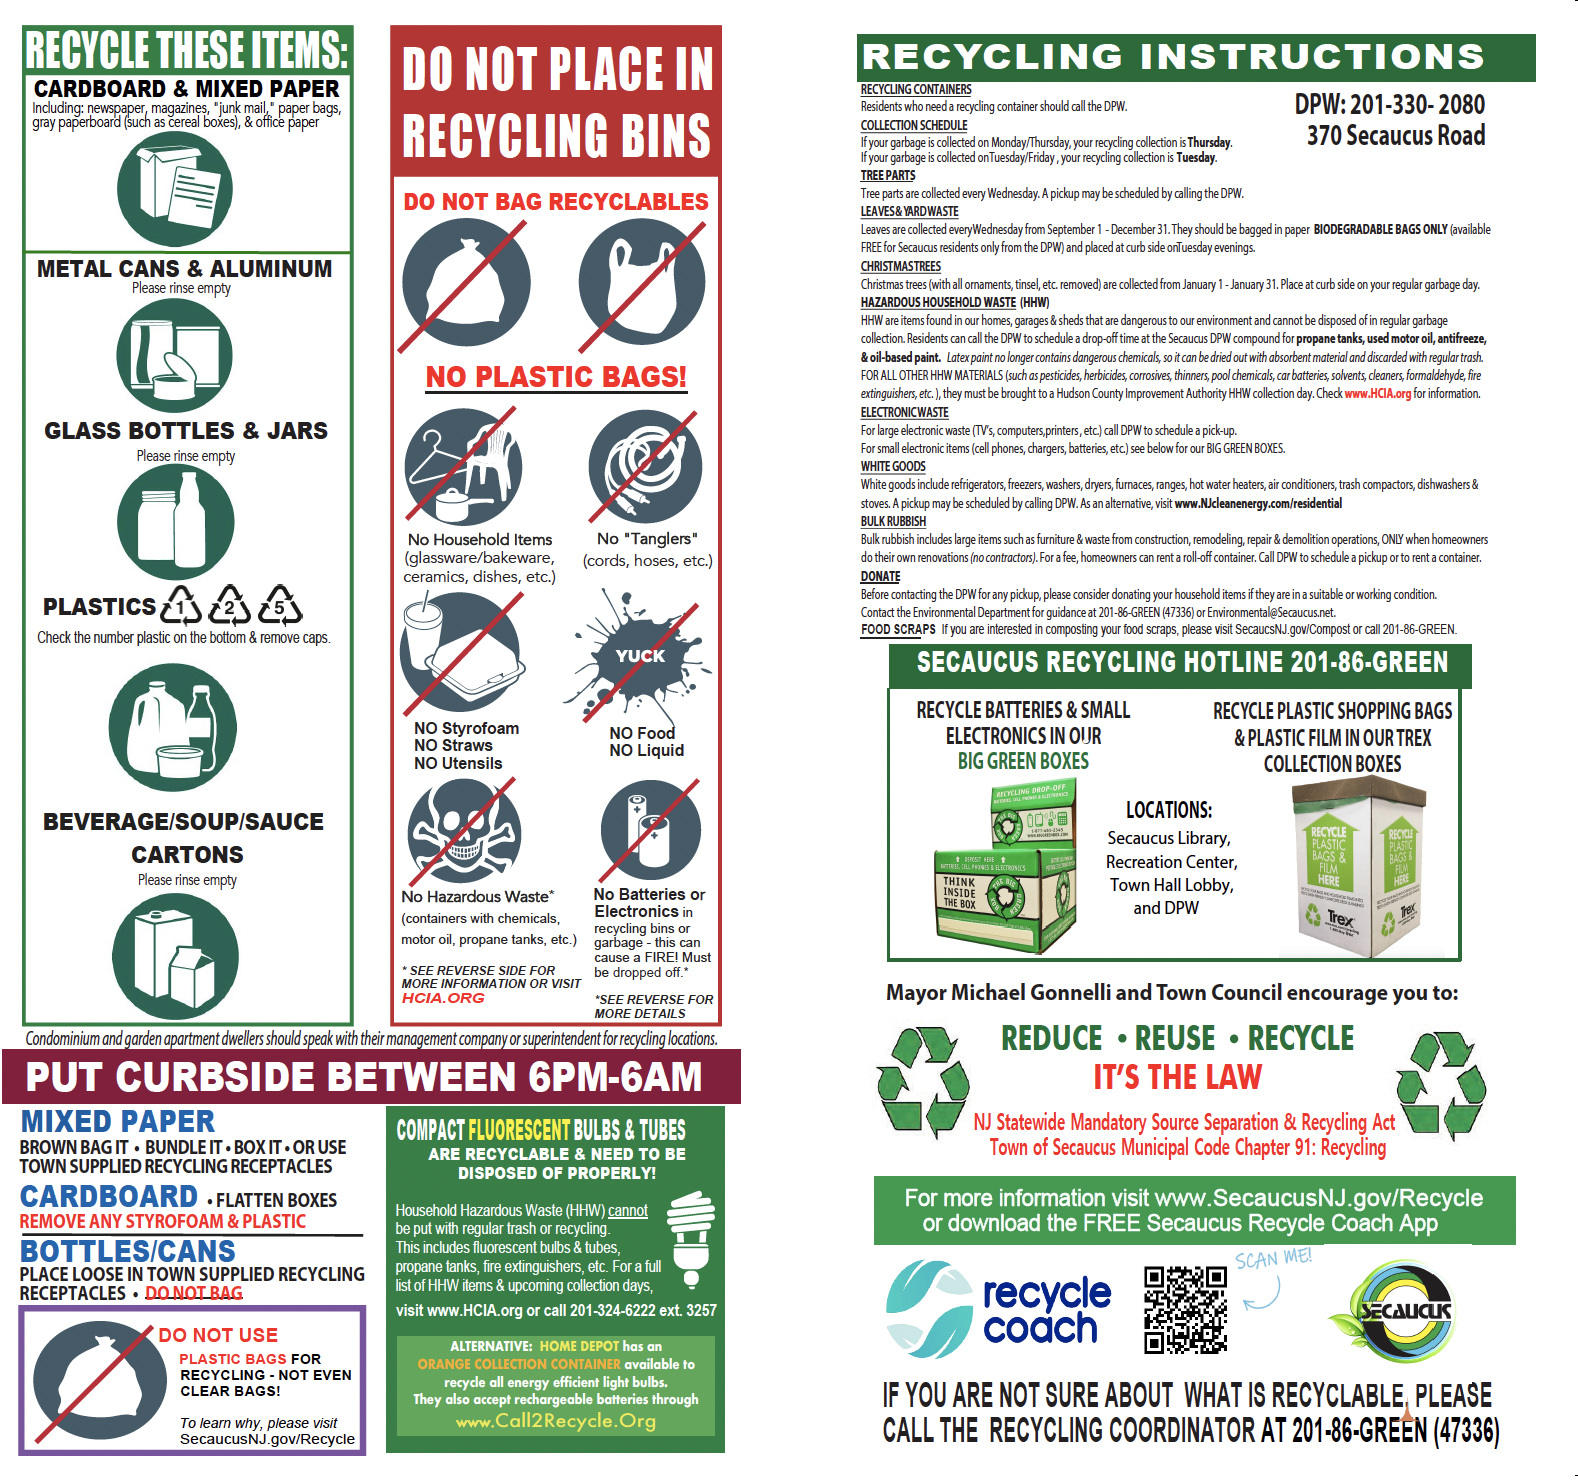 Recycling Instructions